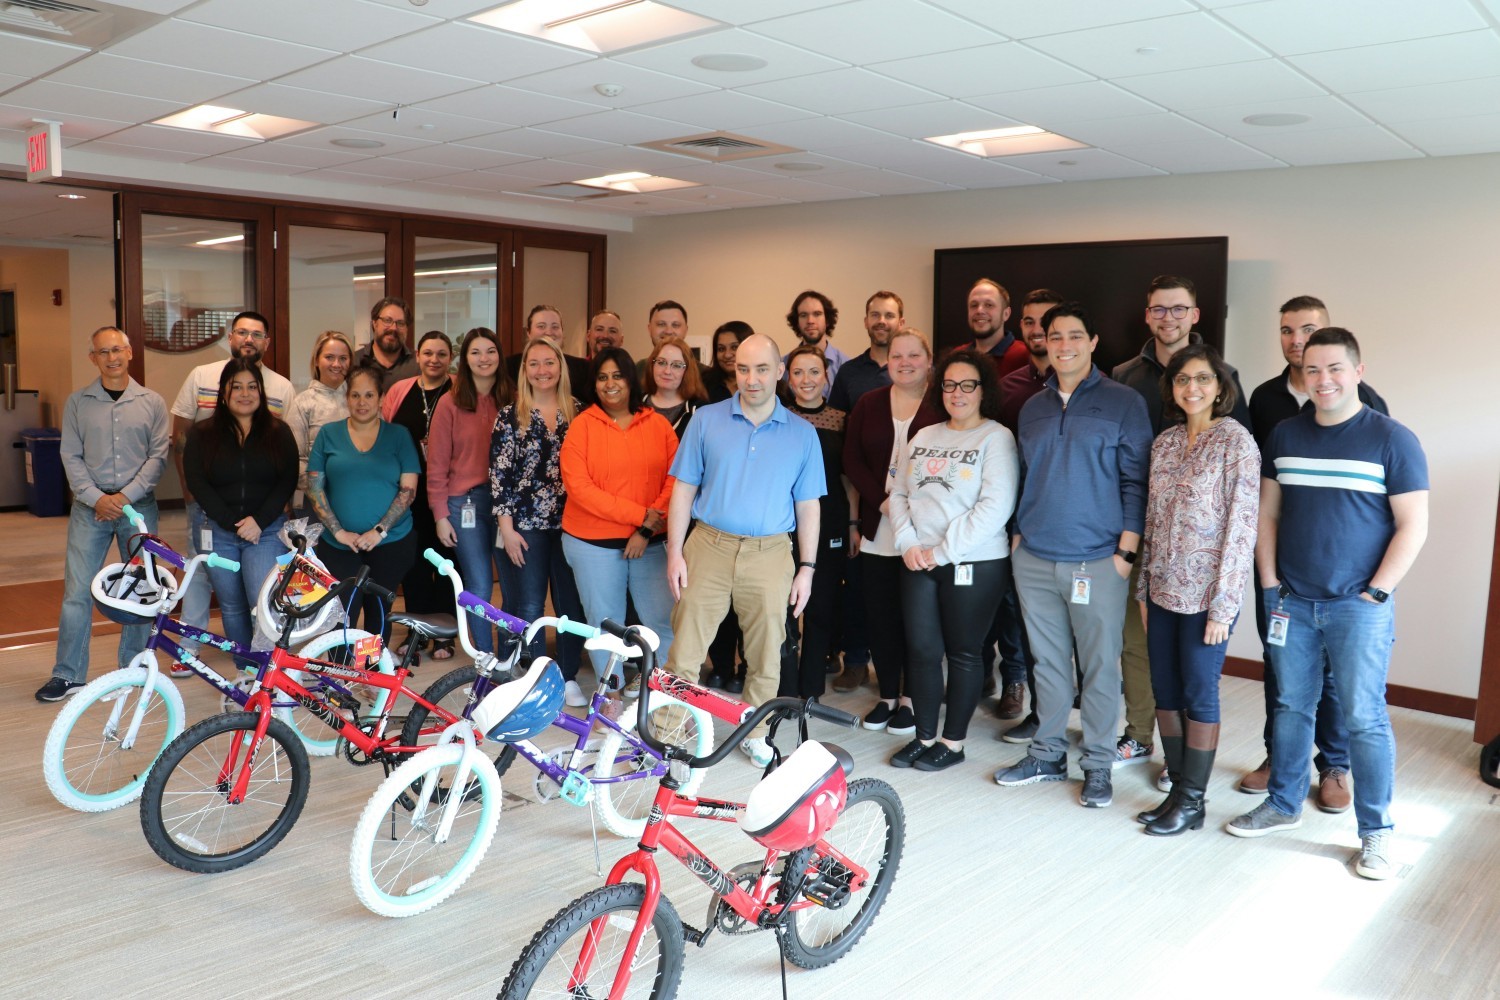 Just one of many in-house team building events, COCC's bike builds benefit local community support organizations.